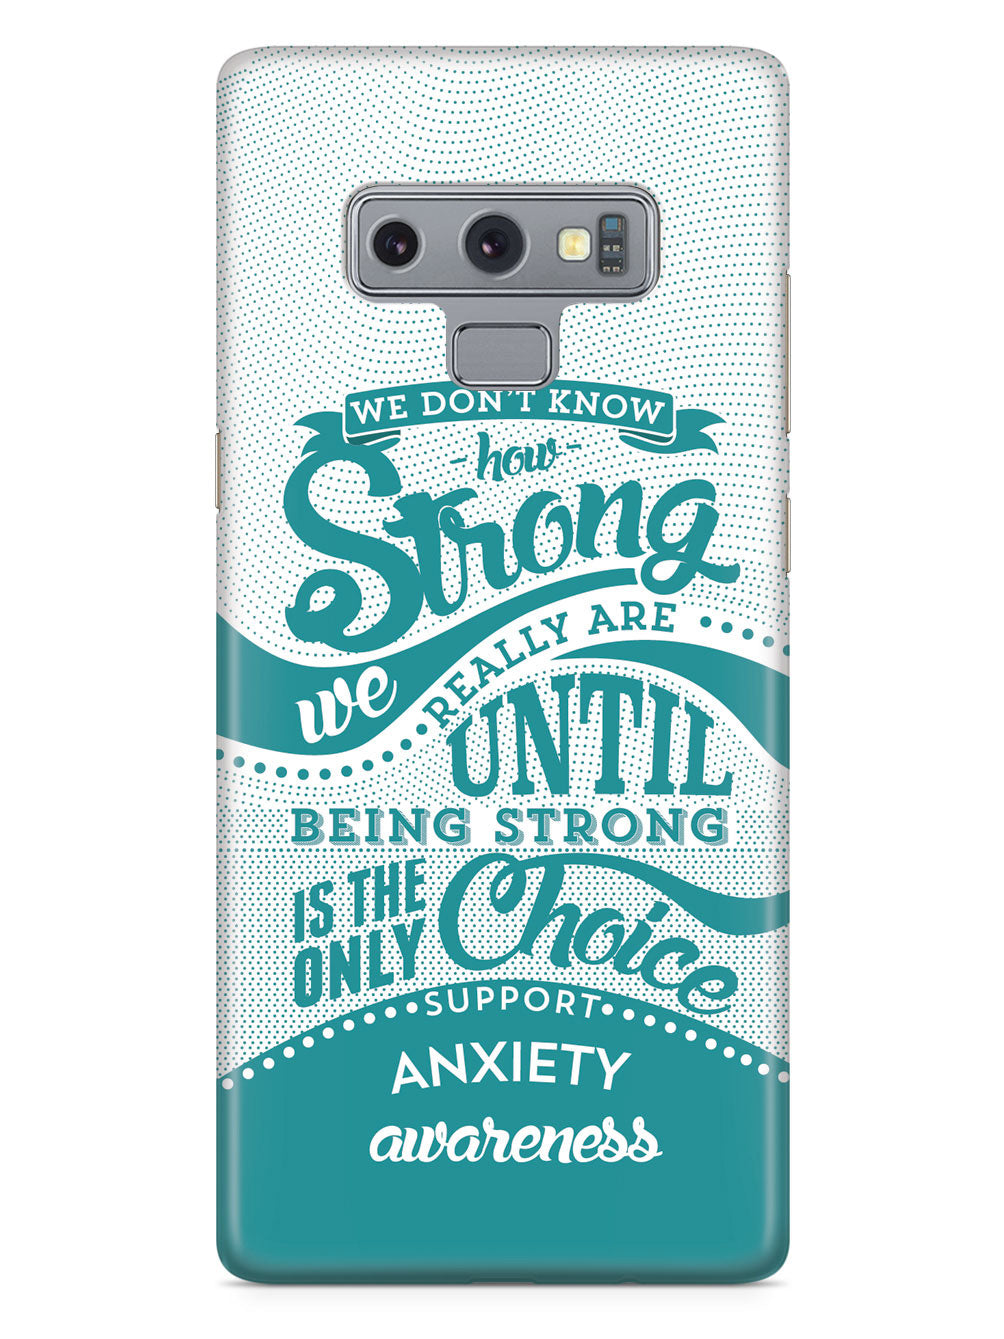 Anxiety Disorder Awareness - How Strong Case